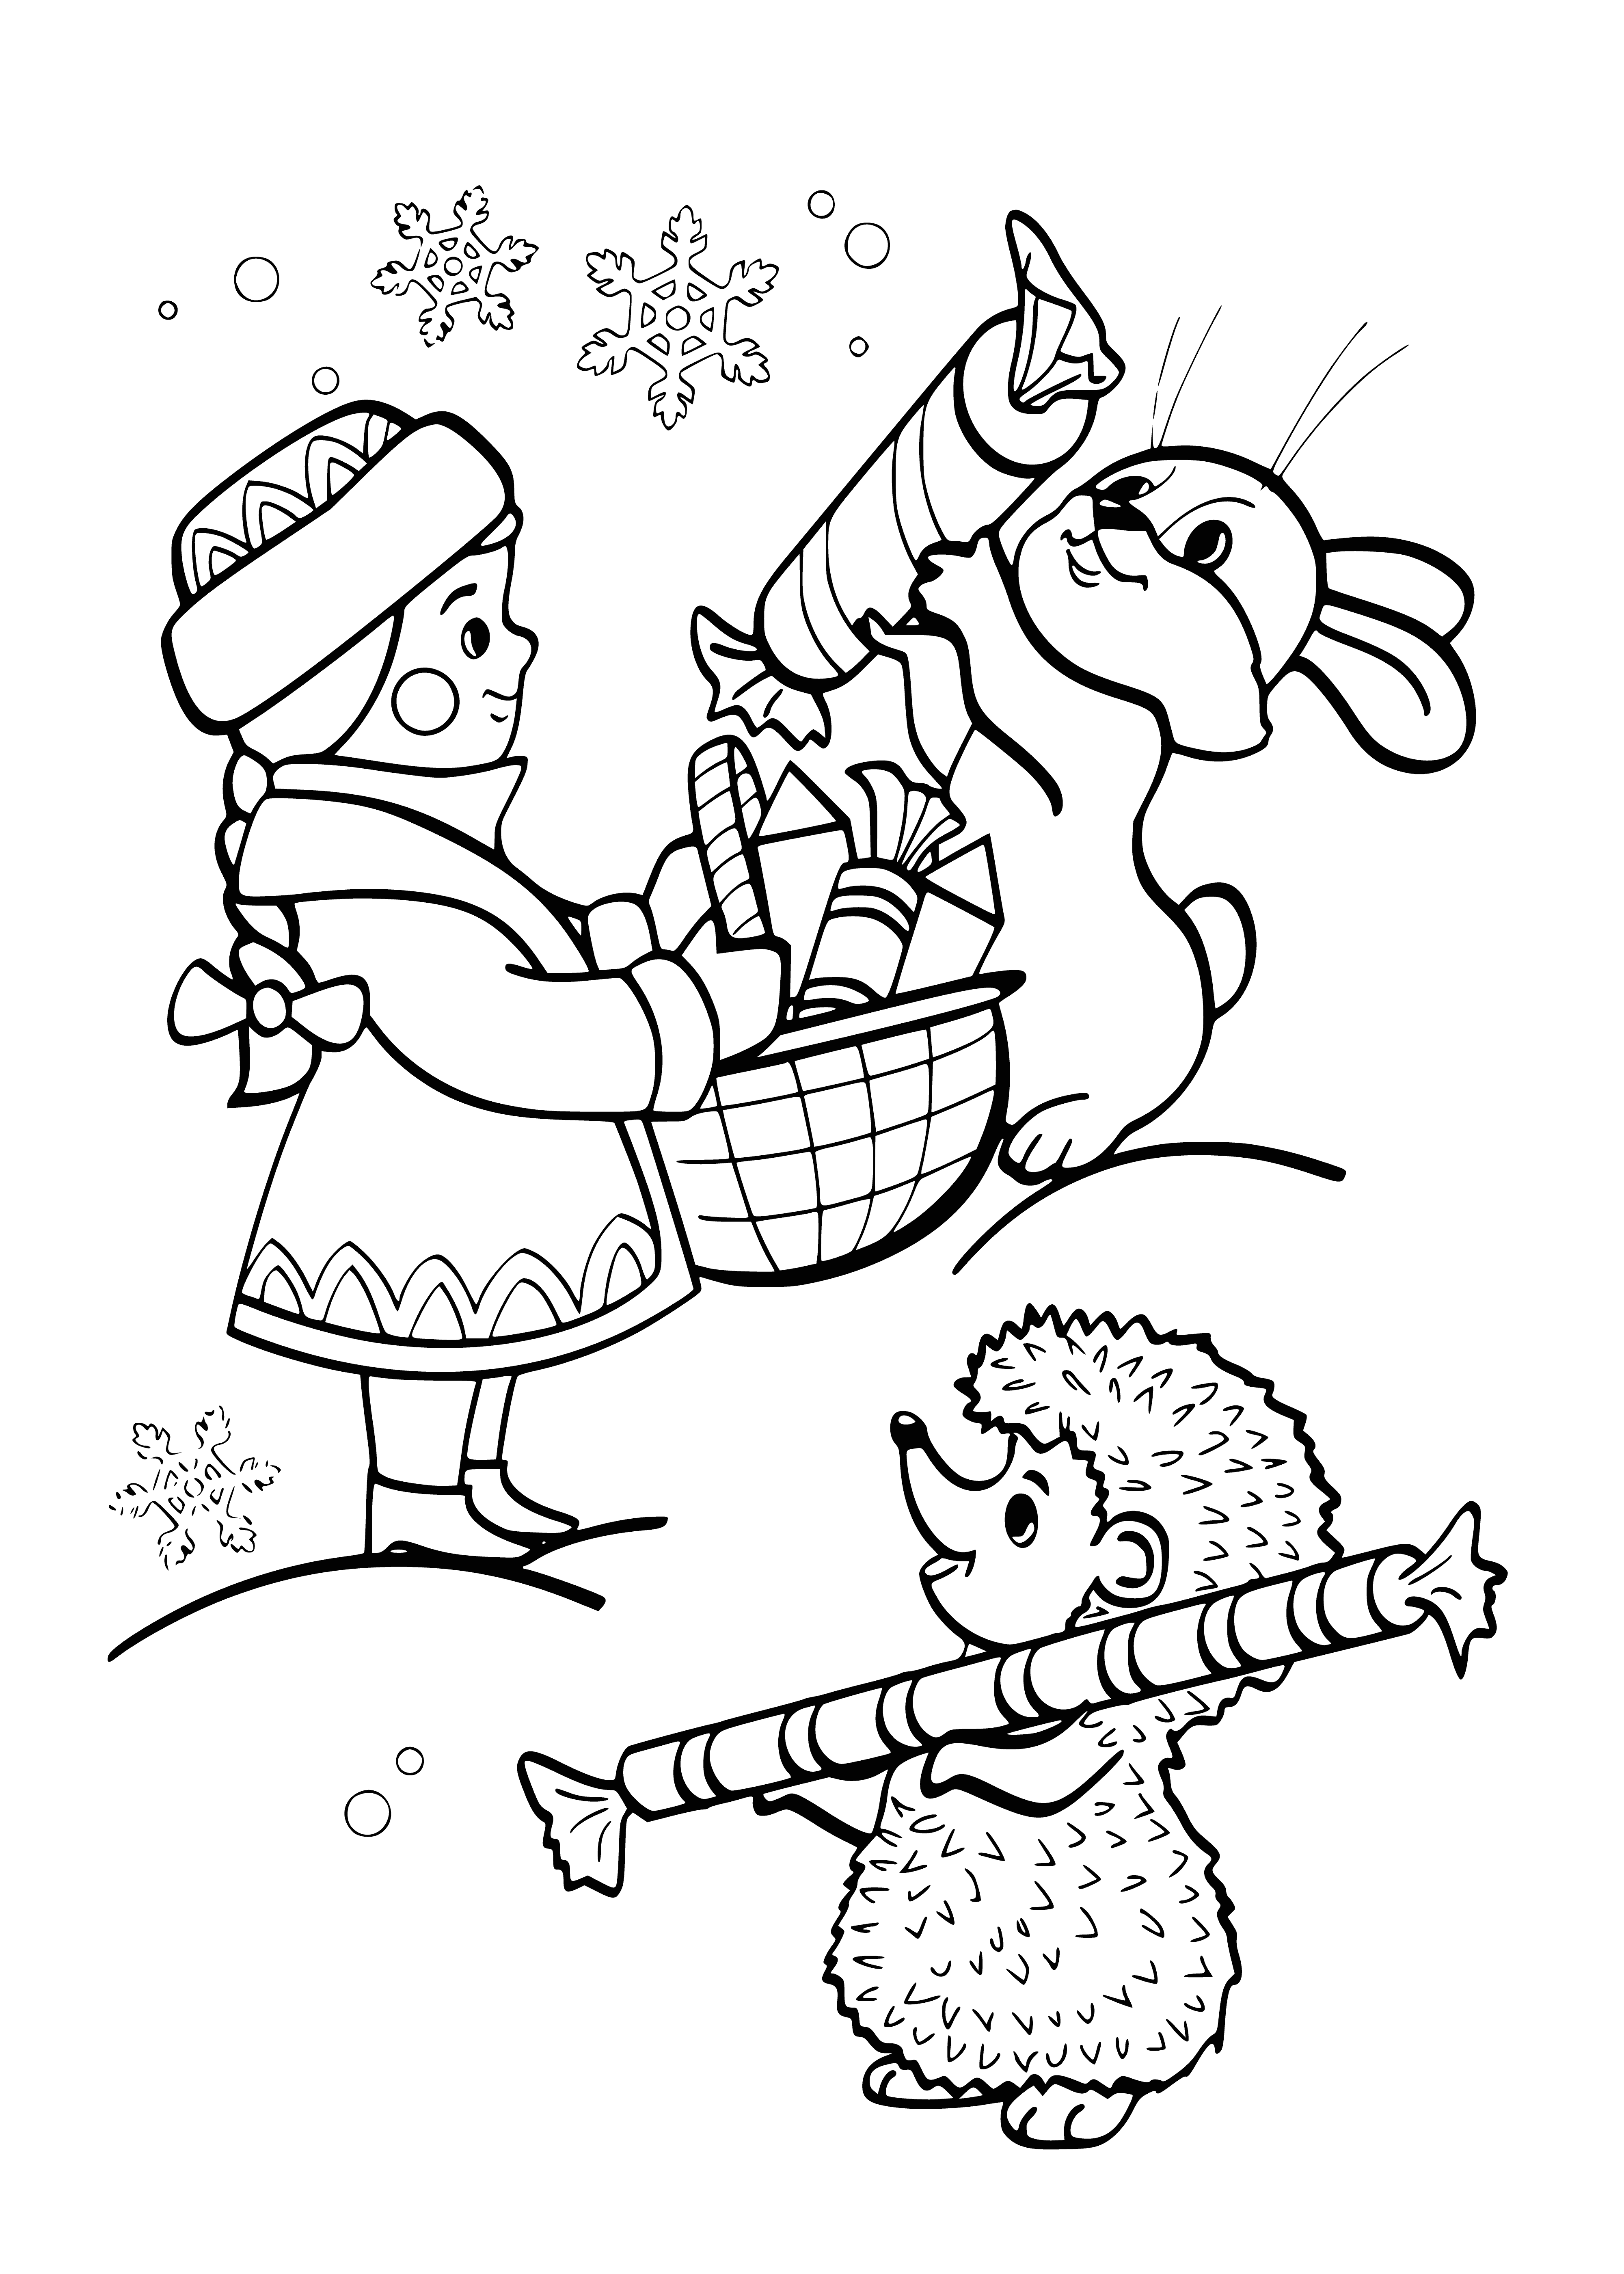 coloring page: Snow Maiden stands in winter forest, wearing white dress, hooded cloak, & scarf; holds sprig of holly. #FairyTale #WinterWonderland